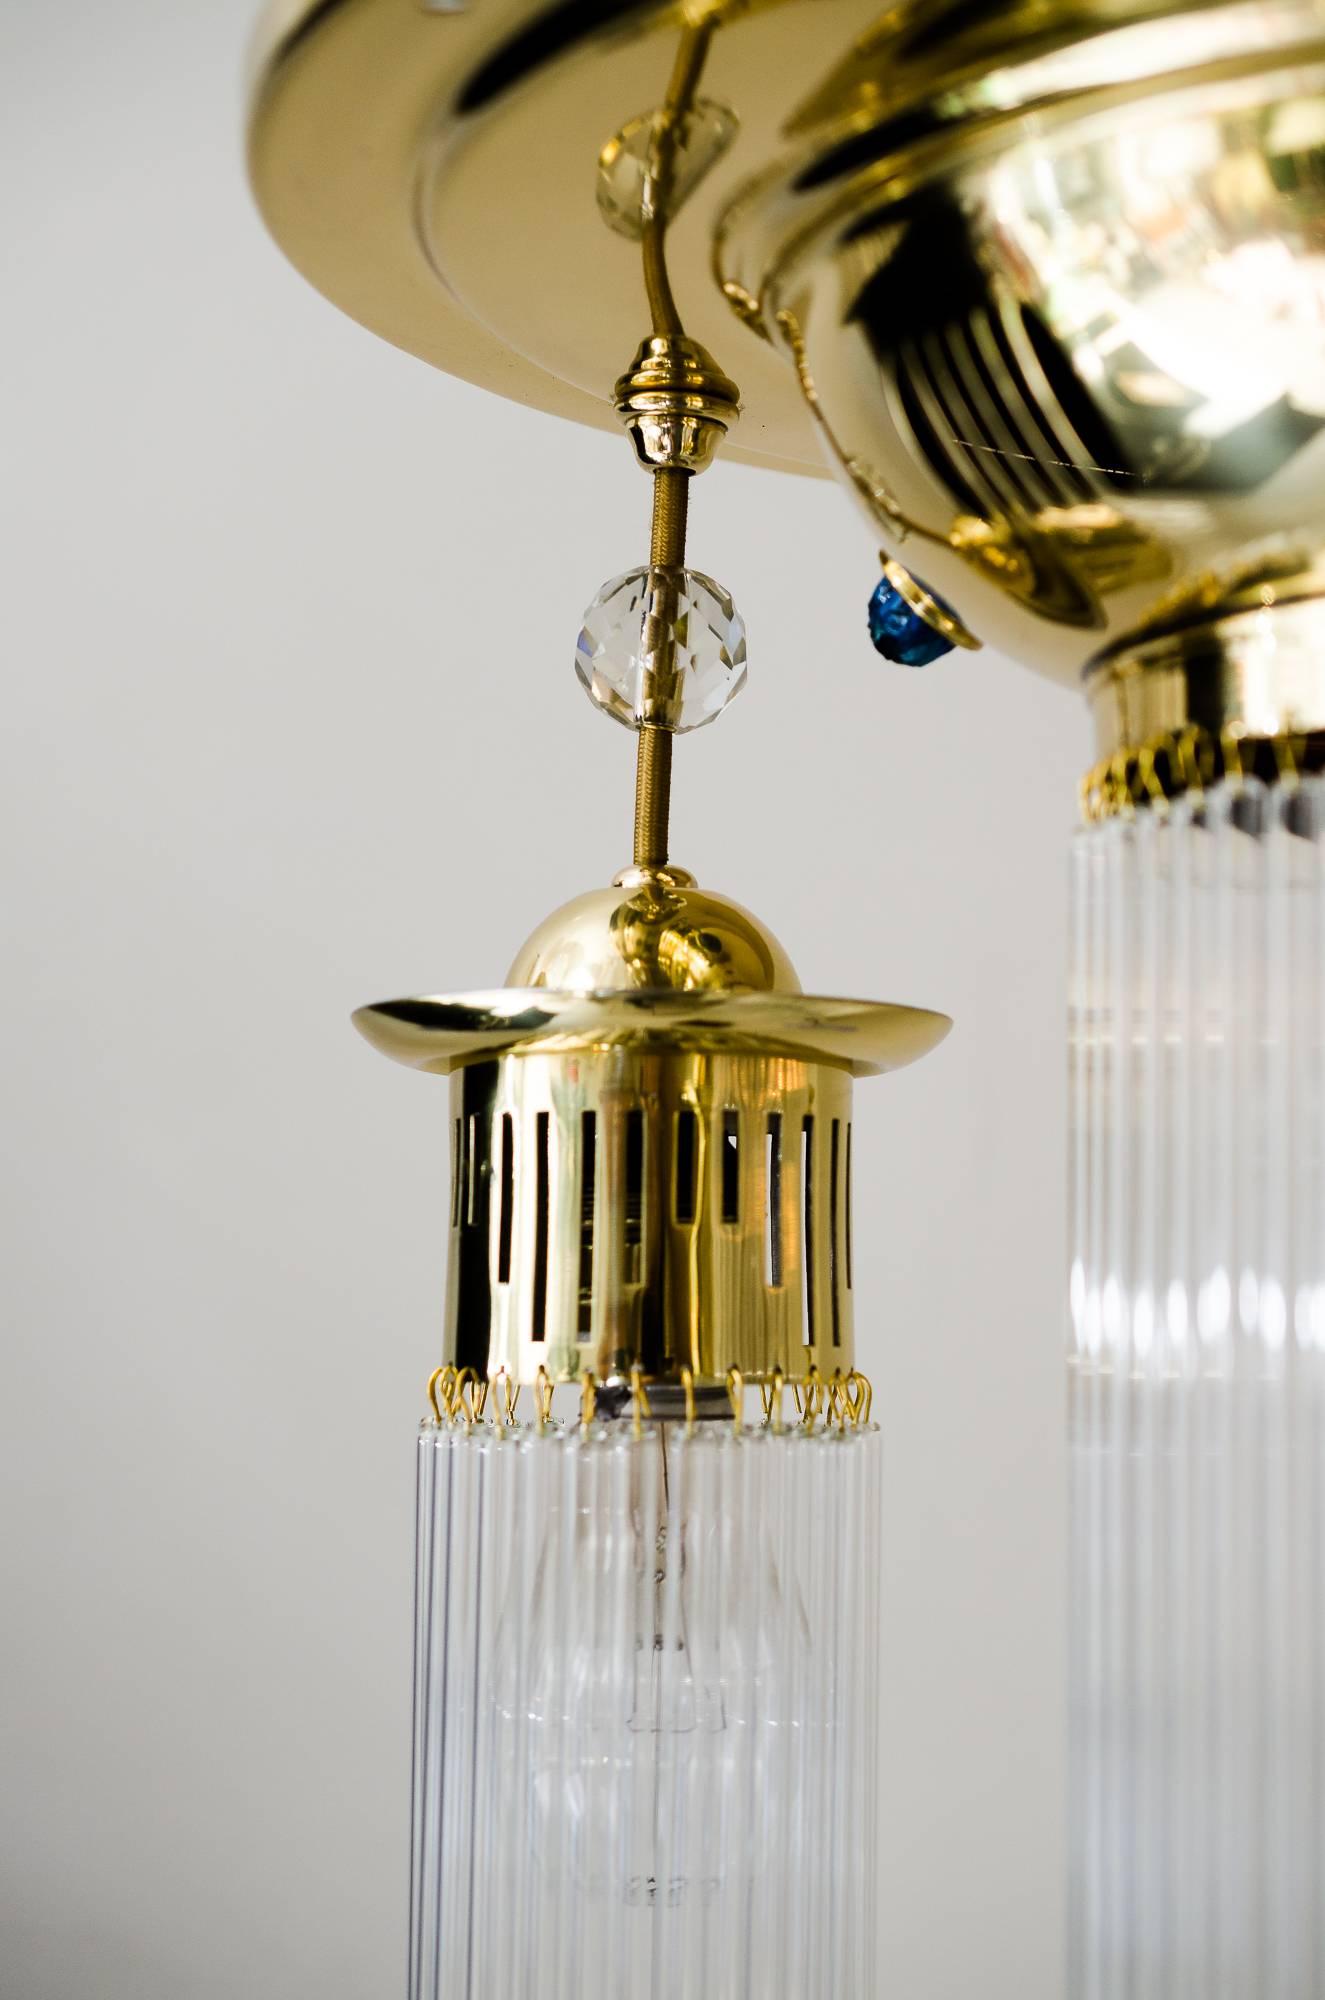 Early 20th Century Art Deco Ceiling Lamp with Glass Sticks and Blue Stones